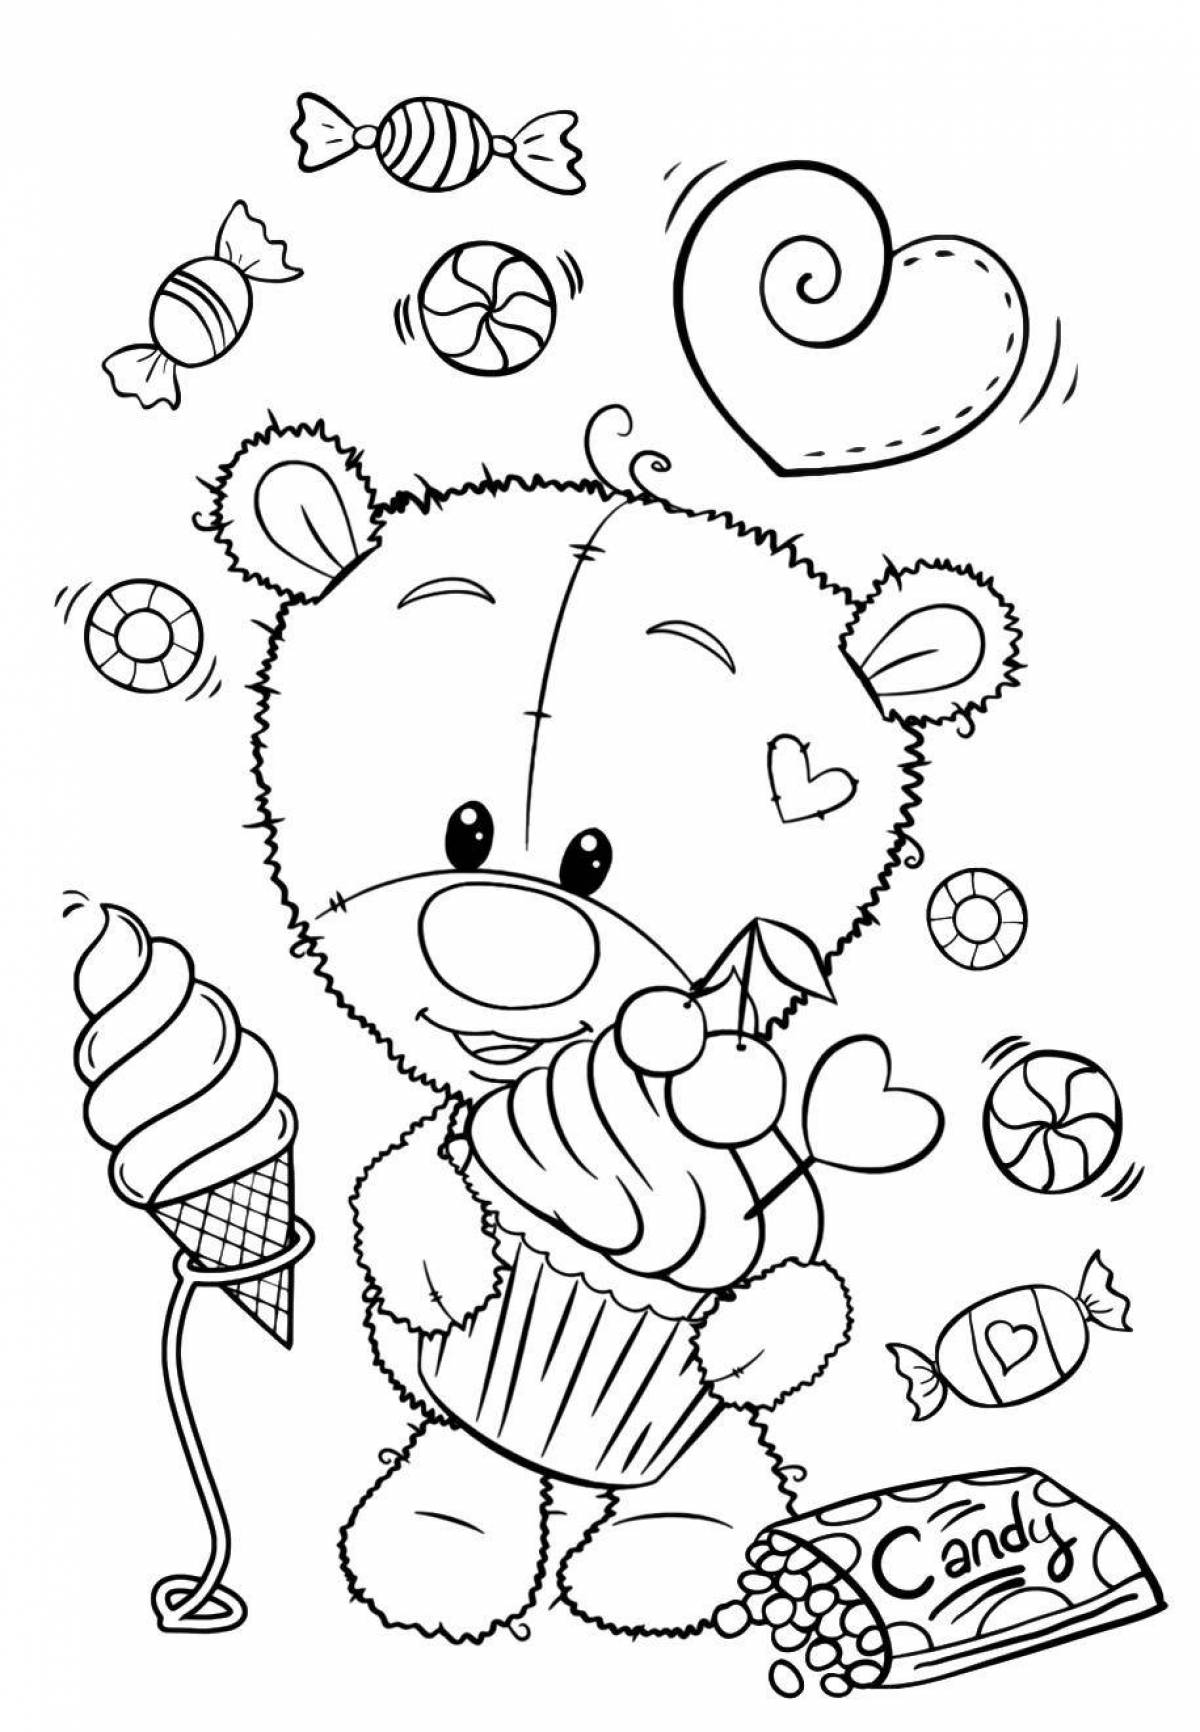 Loving teddy bear coloring page for girls